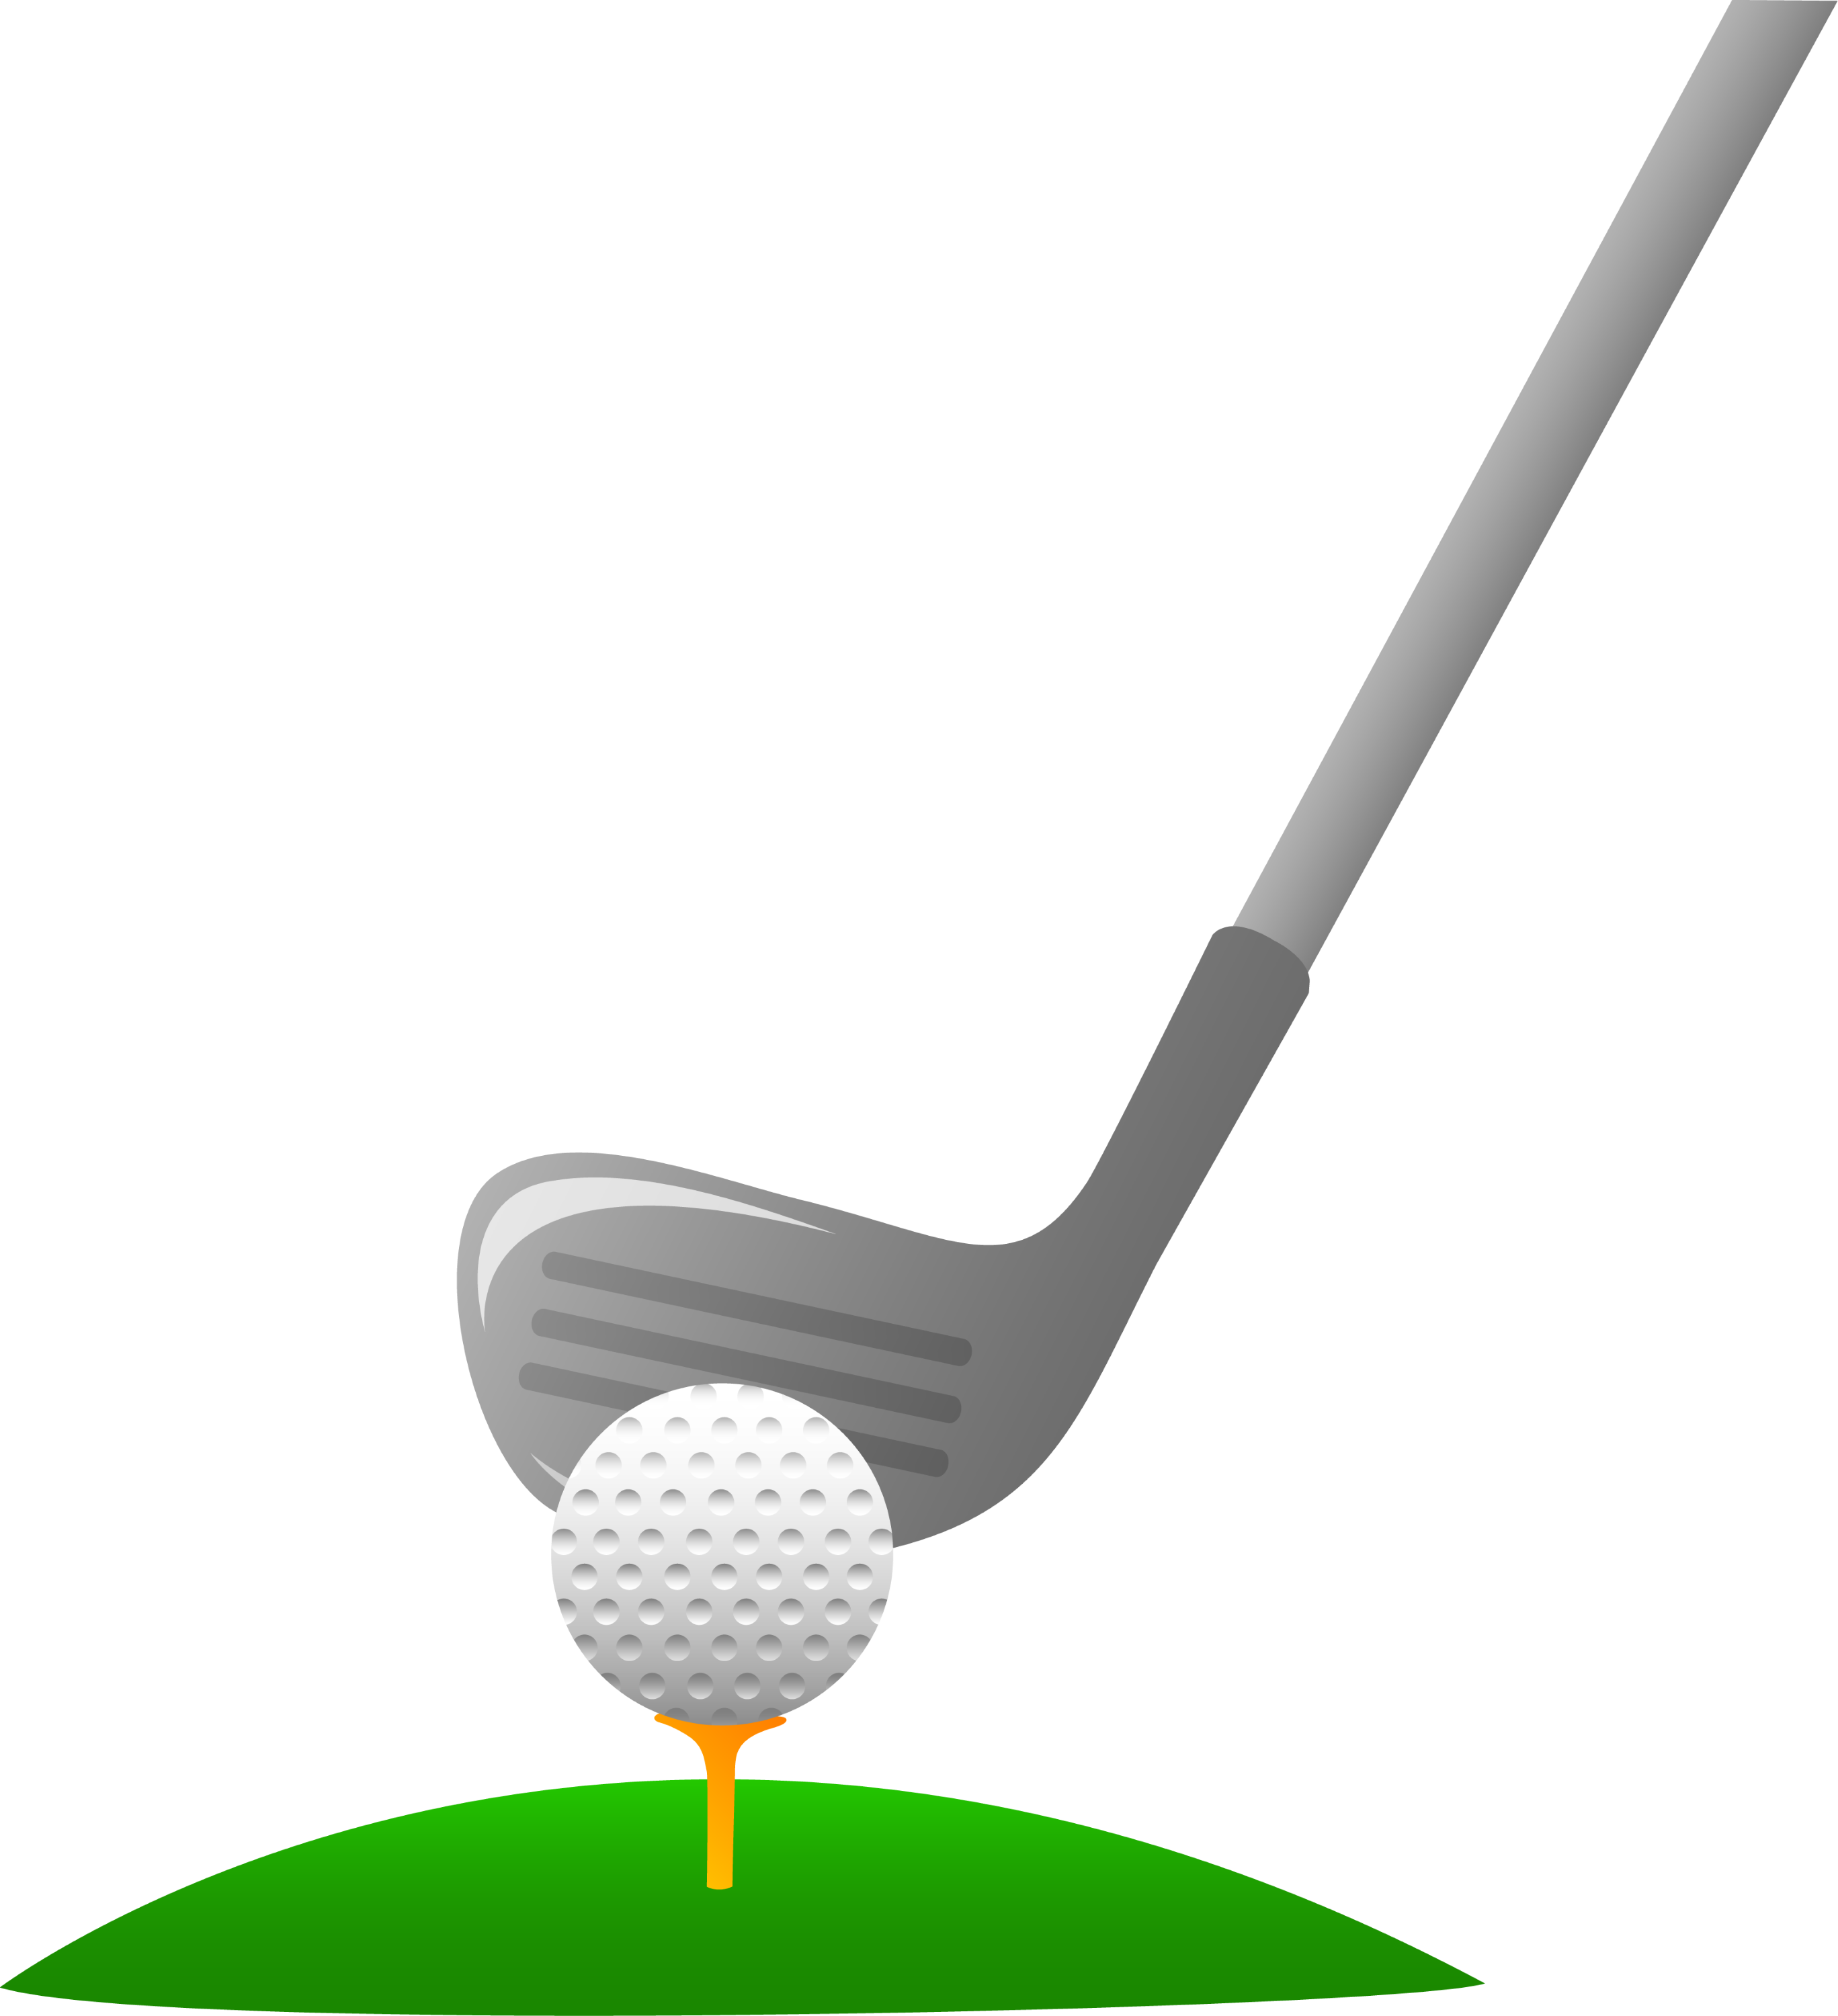 pictures of golf balls clipart - photo #4